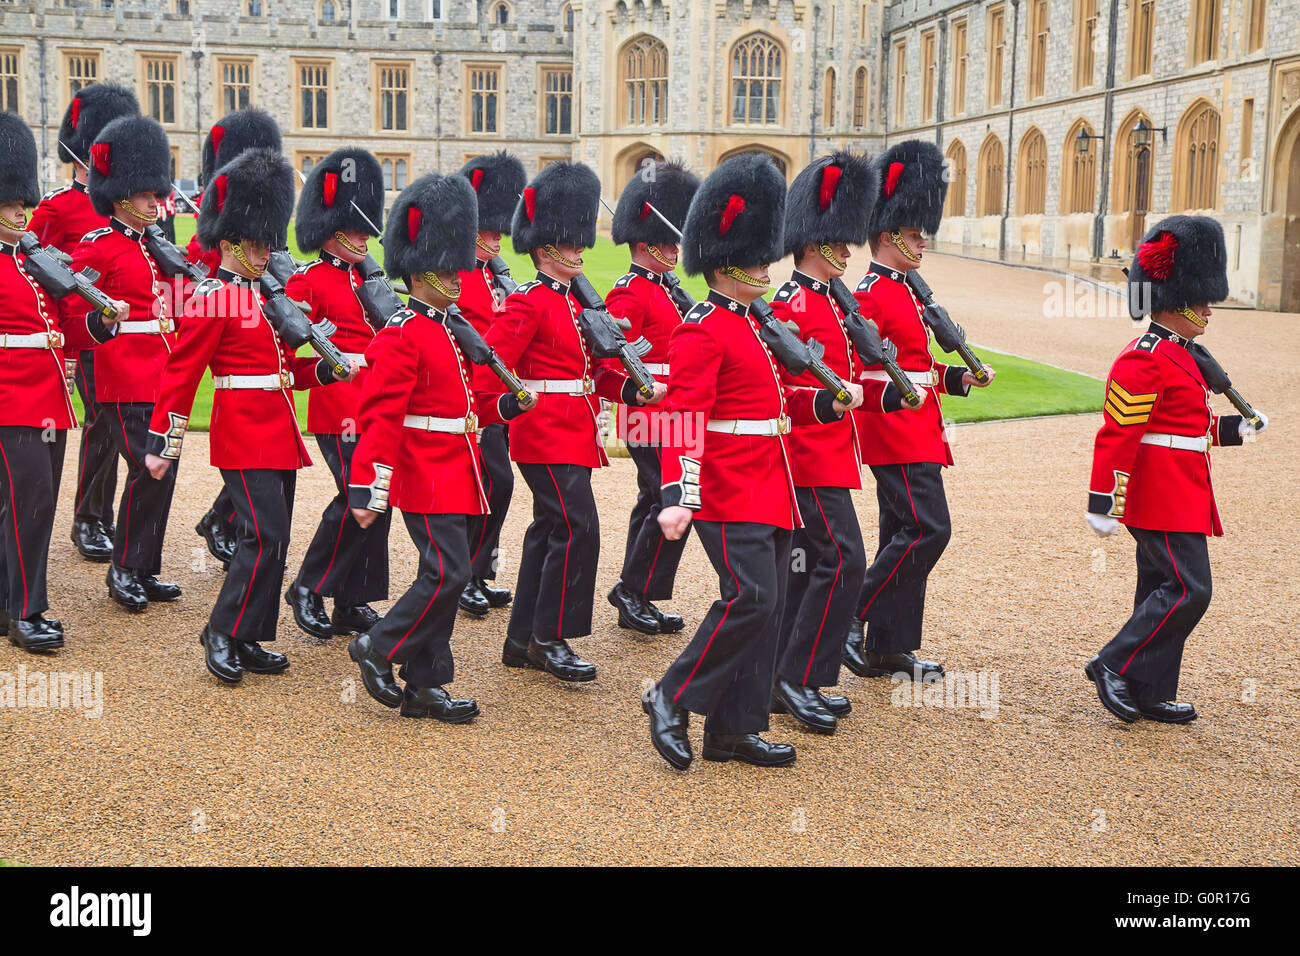 WINDSOR - APRIL 16: Unidentified men members of the royal guard during change ceremony on April 16, 2016 in Windsor, United King Stock Photo